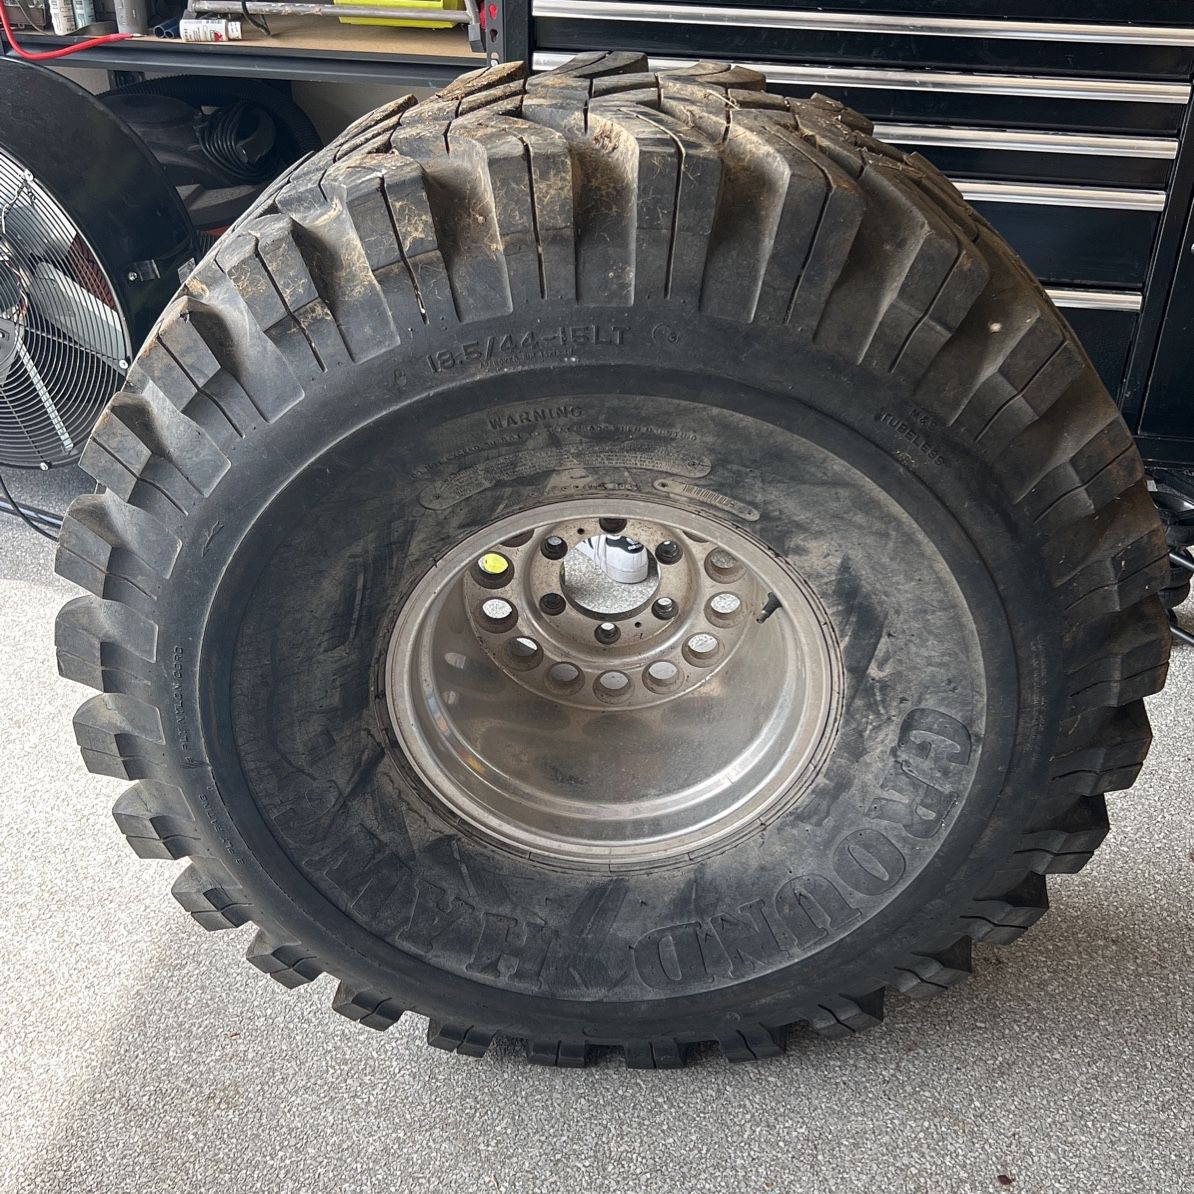 44” Ground Hawg Tires